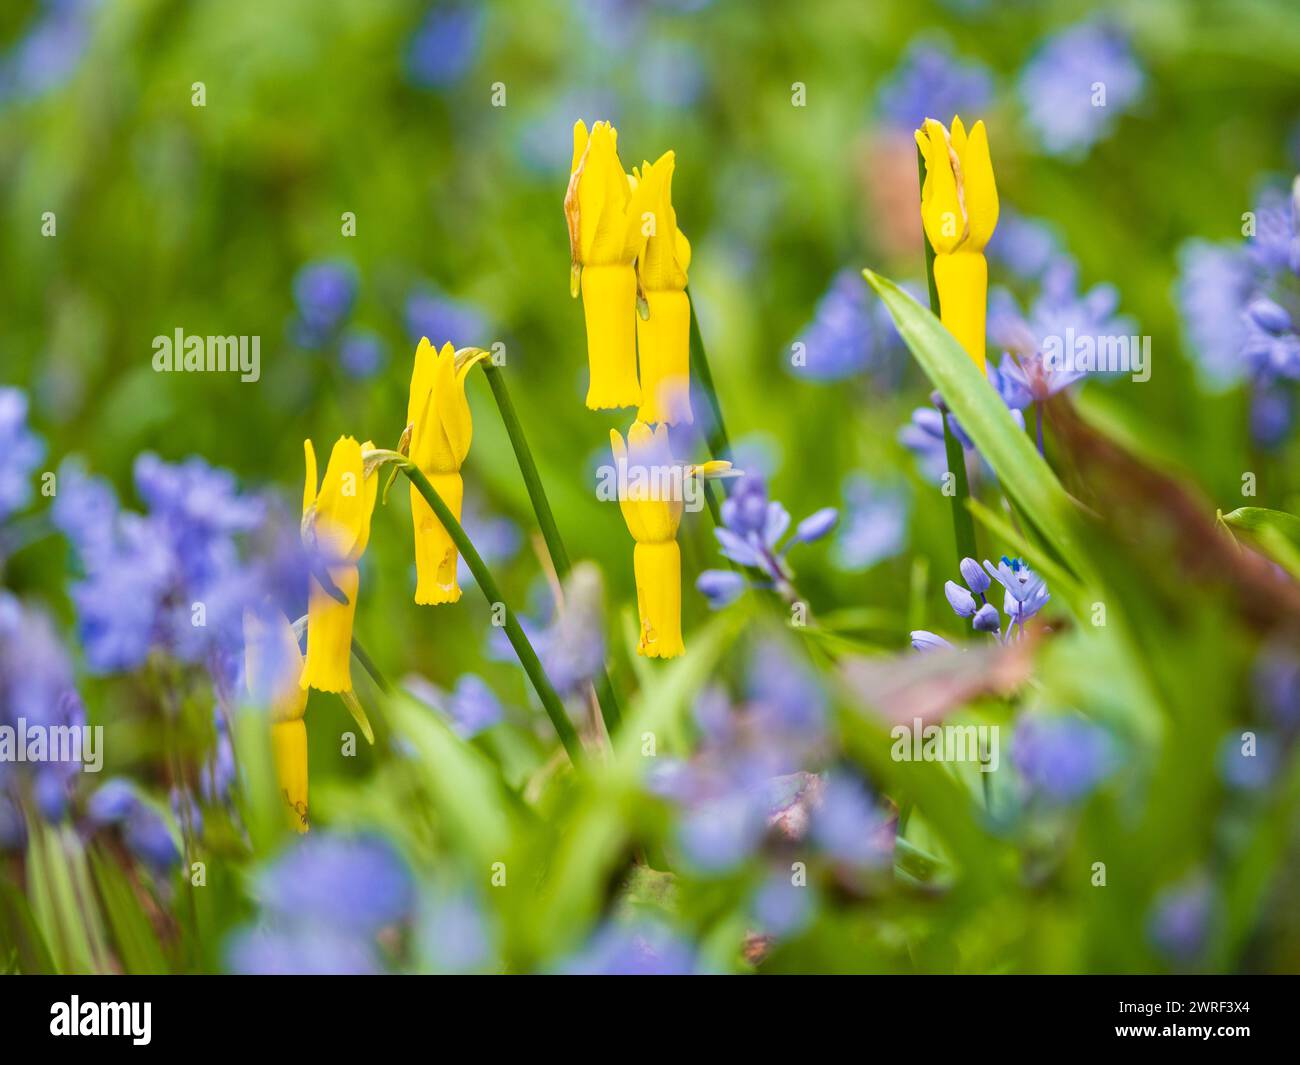 Heavily reflexed yellow flowers of the early apring bloming Narcissus cyclamineus among the blue of Scilla bithynica Stock Photo